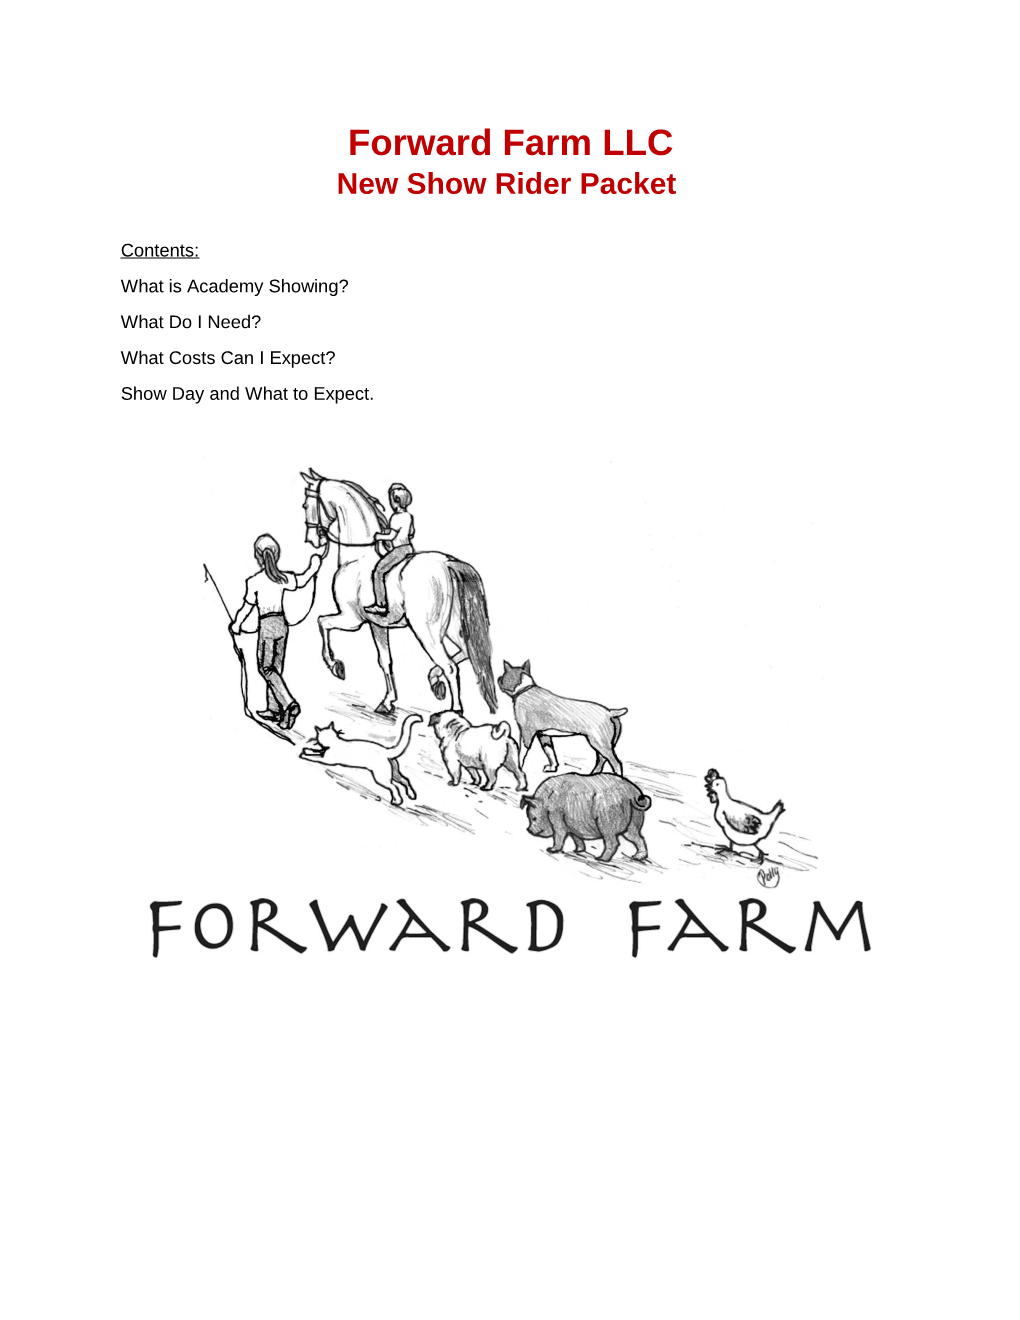 New Show Rider Packet